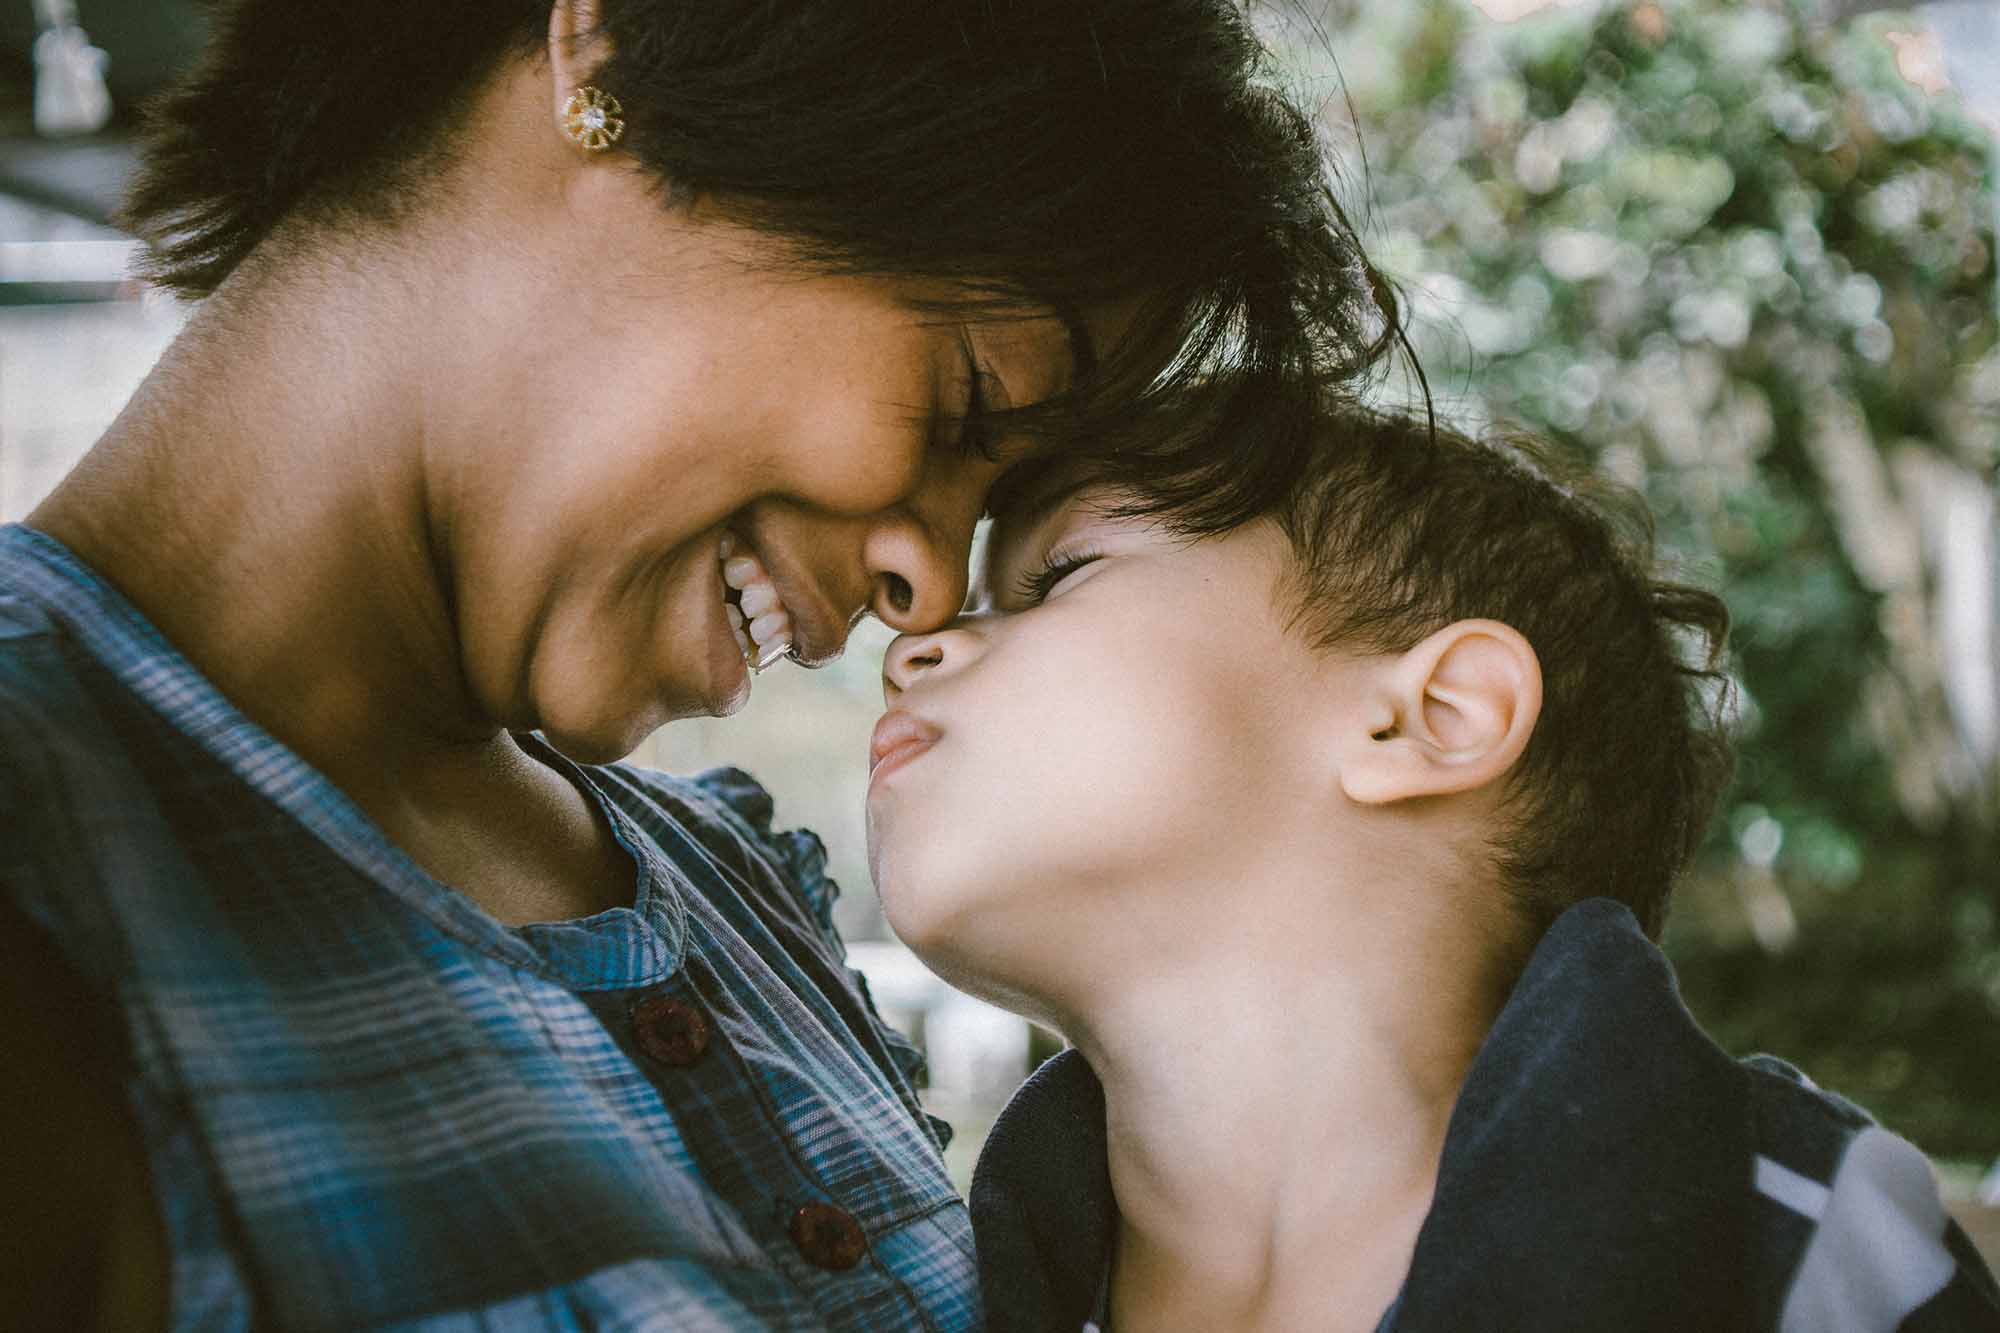 Jobfind-Ganeesha’s Story - image of a woman smiling and leaning down to touch her face to a young boy's face